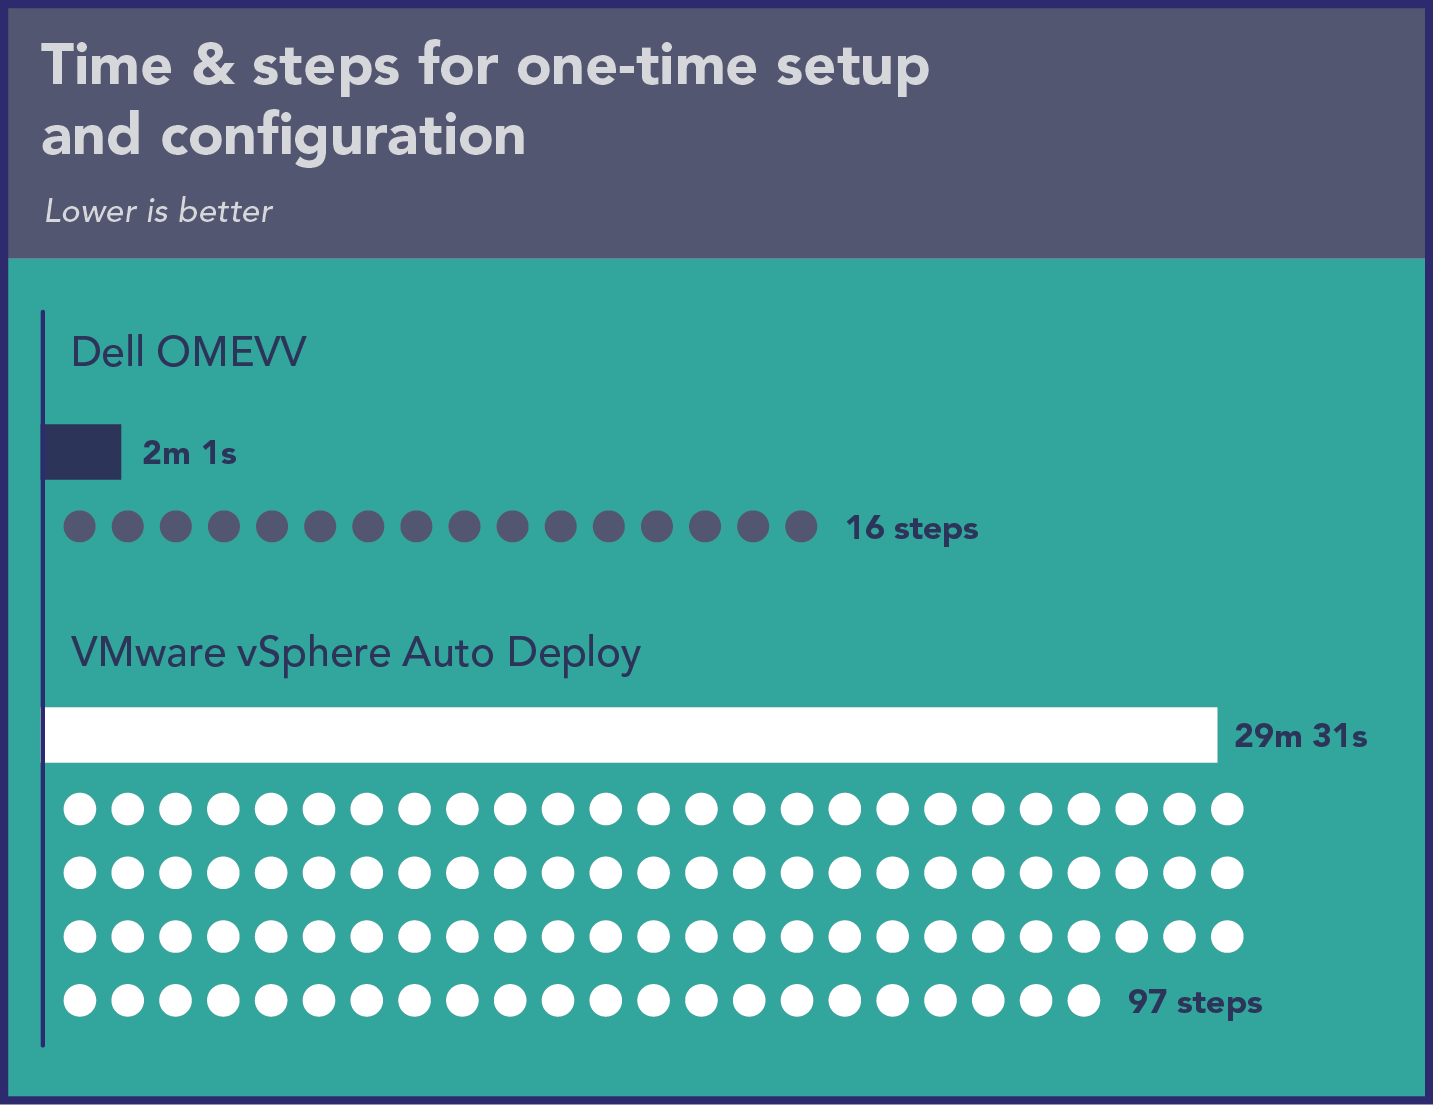 Chart of time and steps to perform one-time setup and configuration of servers. Dell OMEVV shows 2 minutes 1 second and 16 steps. VMware vSphere Auto Deploy shows 29 minutes 31 seconds and 97 steps.